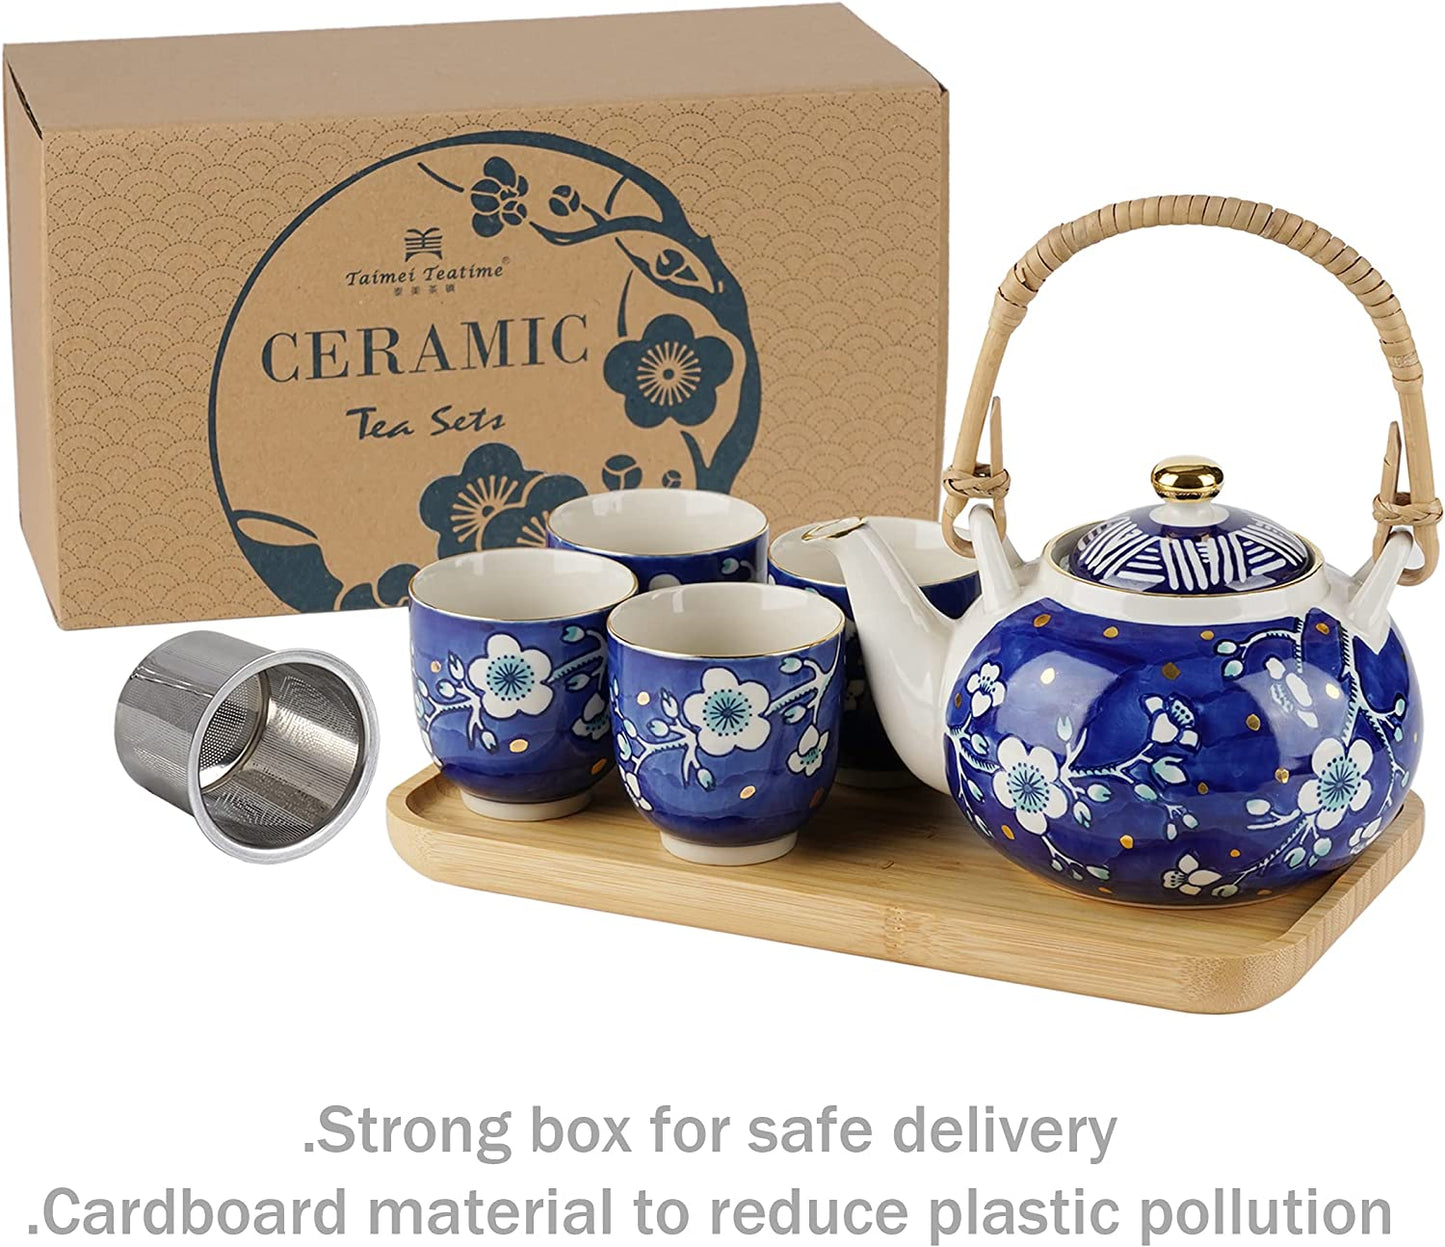 Cobalt Japanese Ceramic Tea Sets with 1 Teapot, 4 Tea Cups, Infuser, Tray